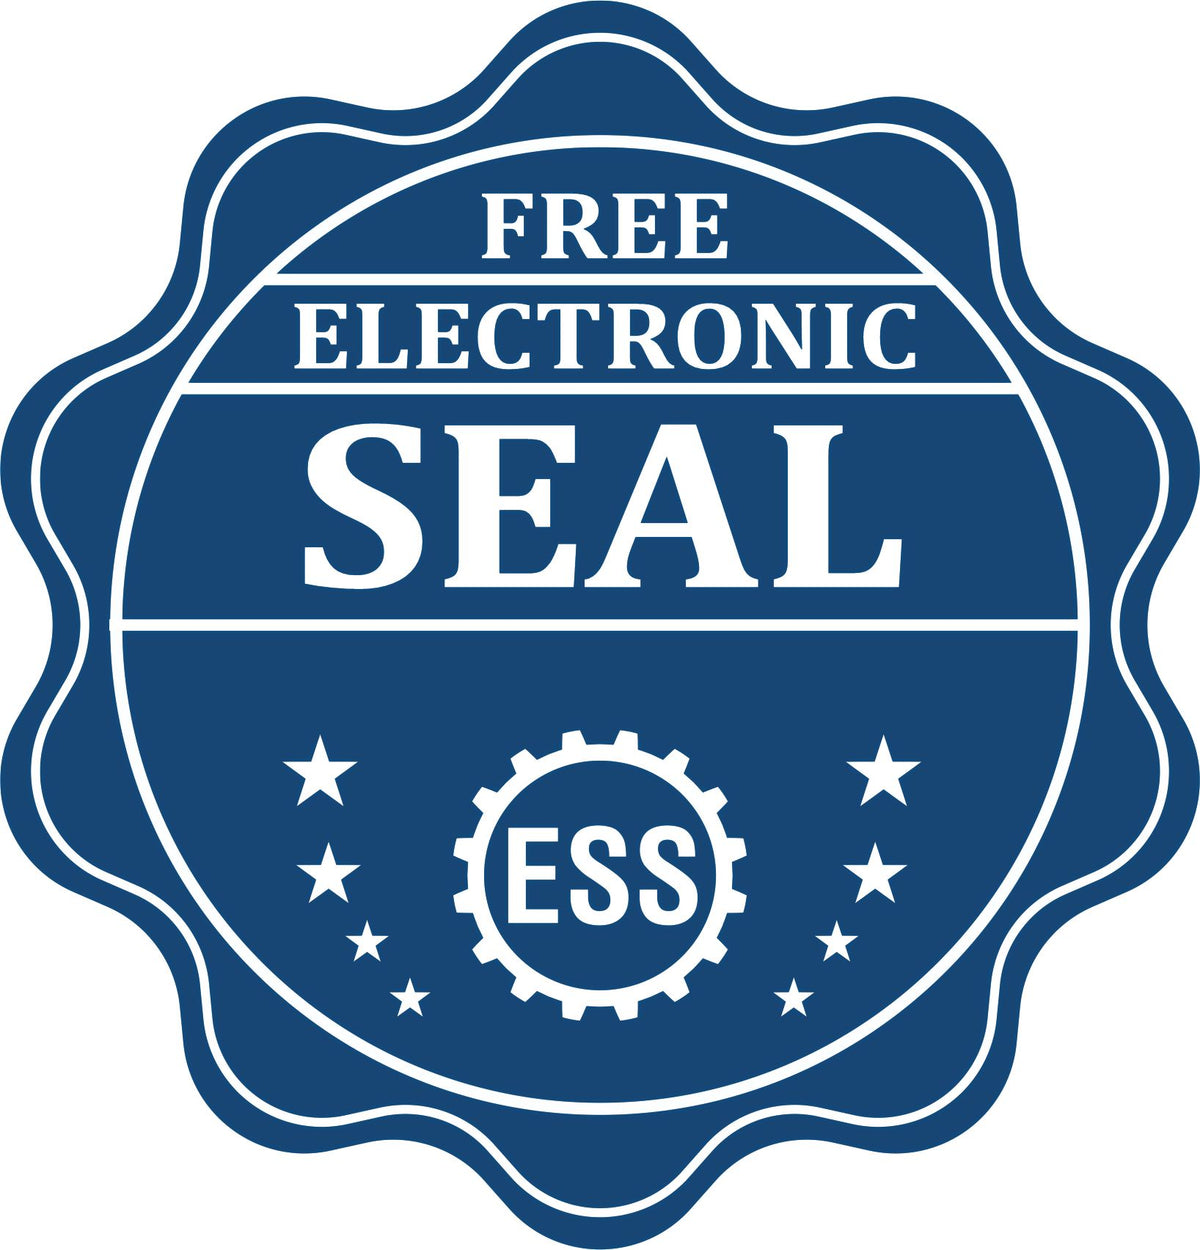 A badge showing a free electronic seal for the Heavy Duty Cast Iron Georgia Geologist Seal Embosser with stars and the ESS gear on the emblem.